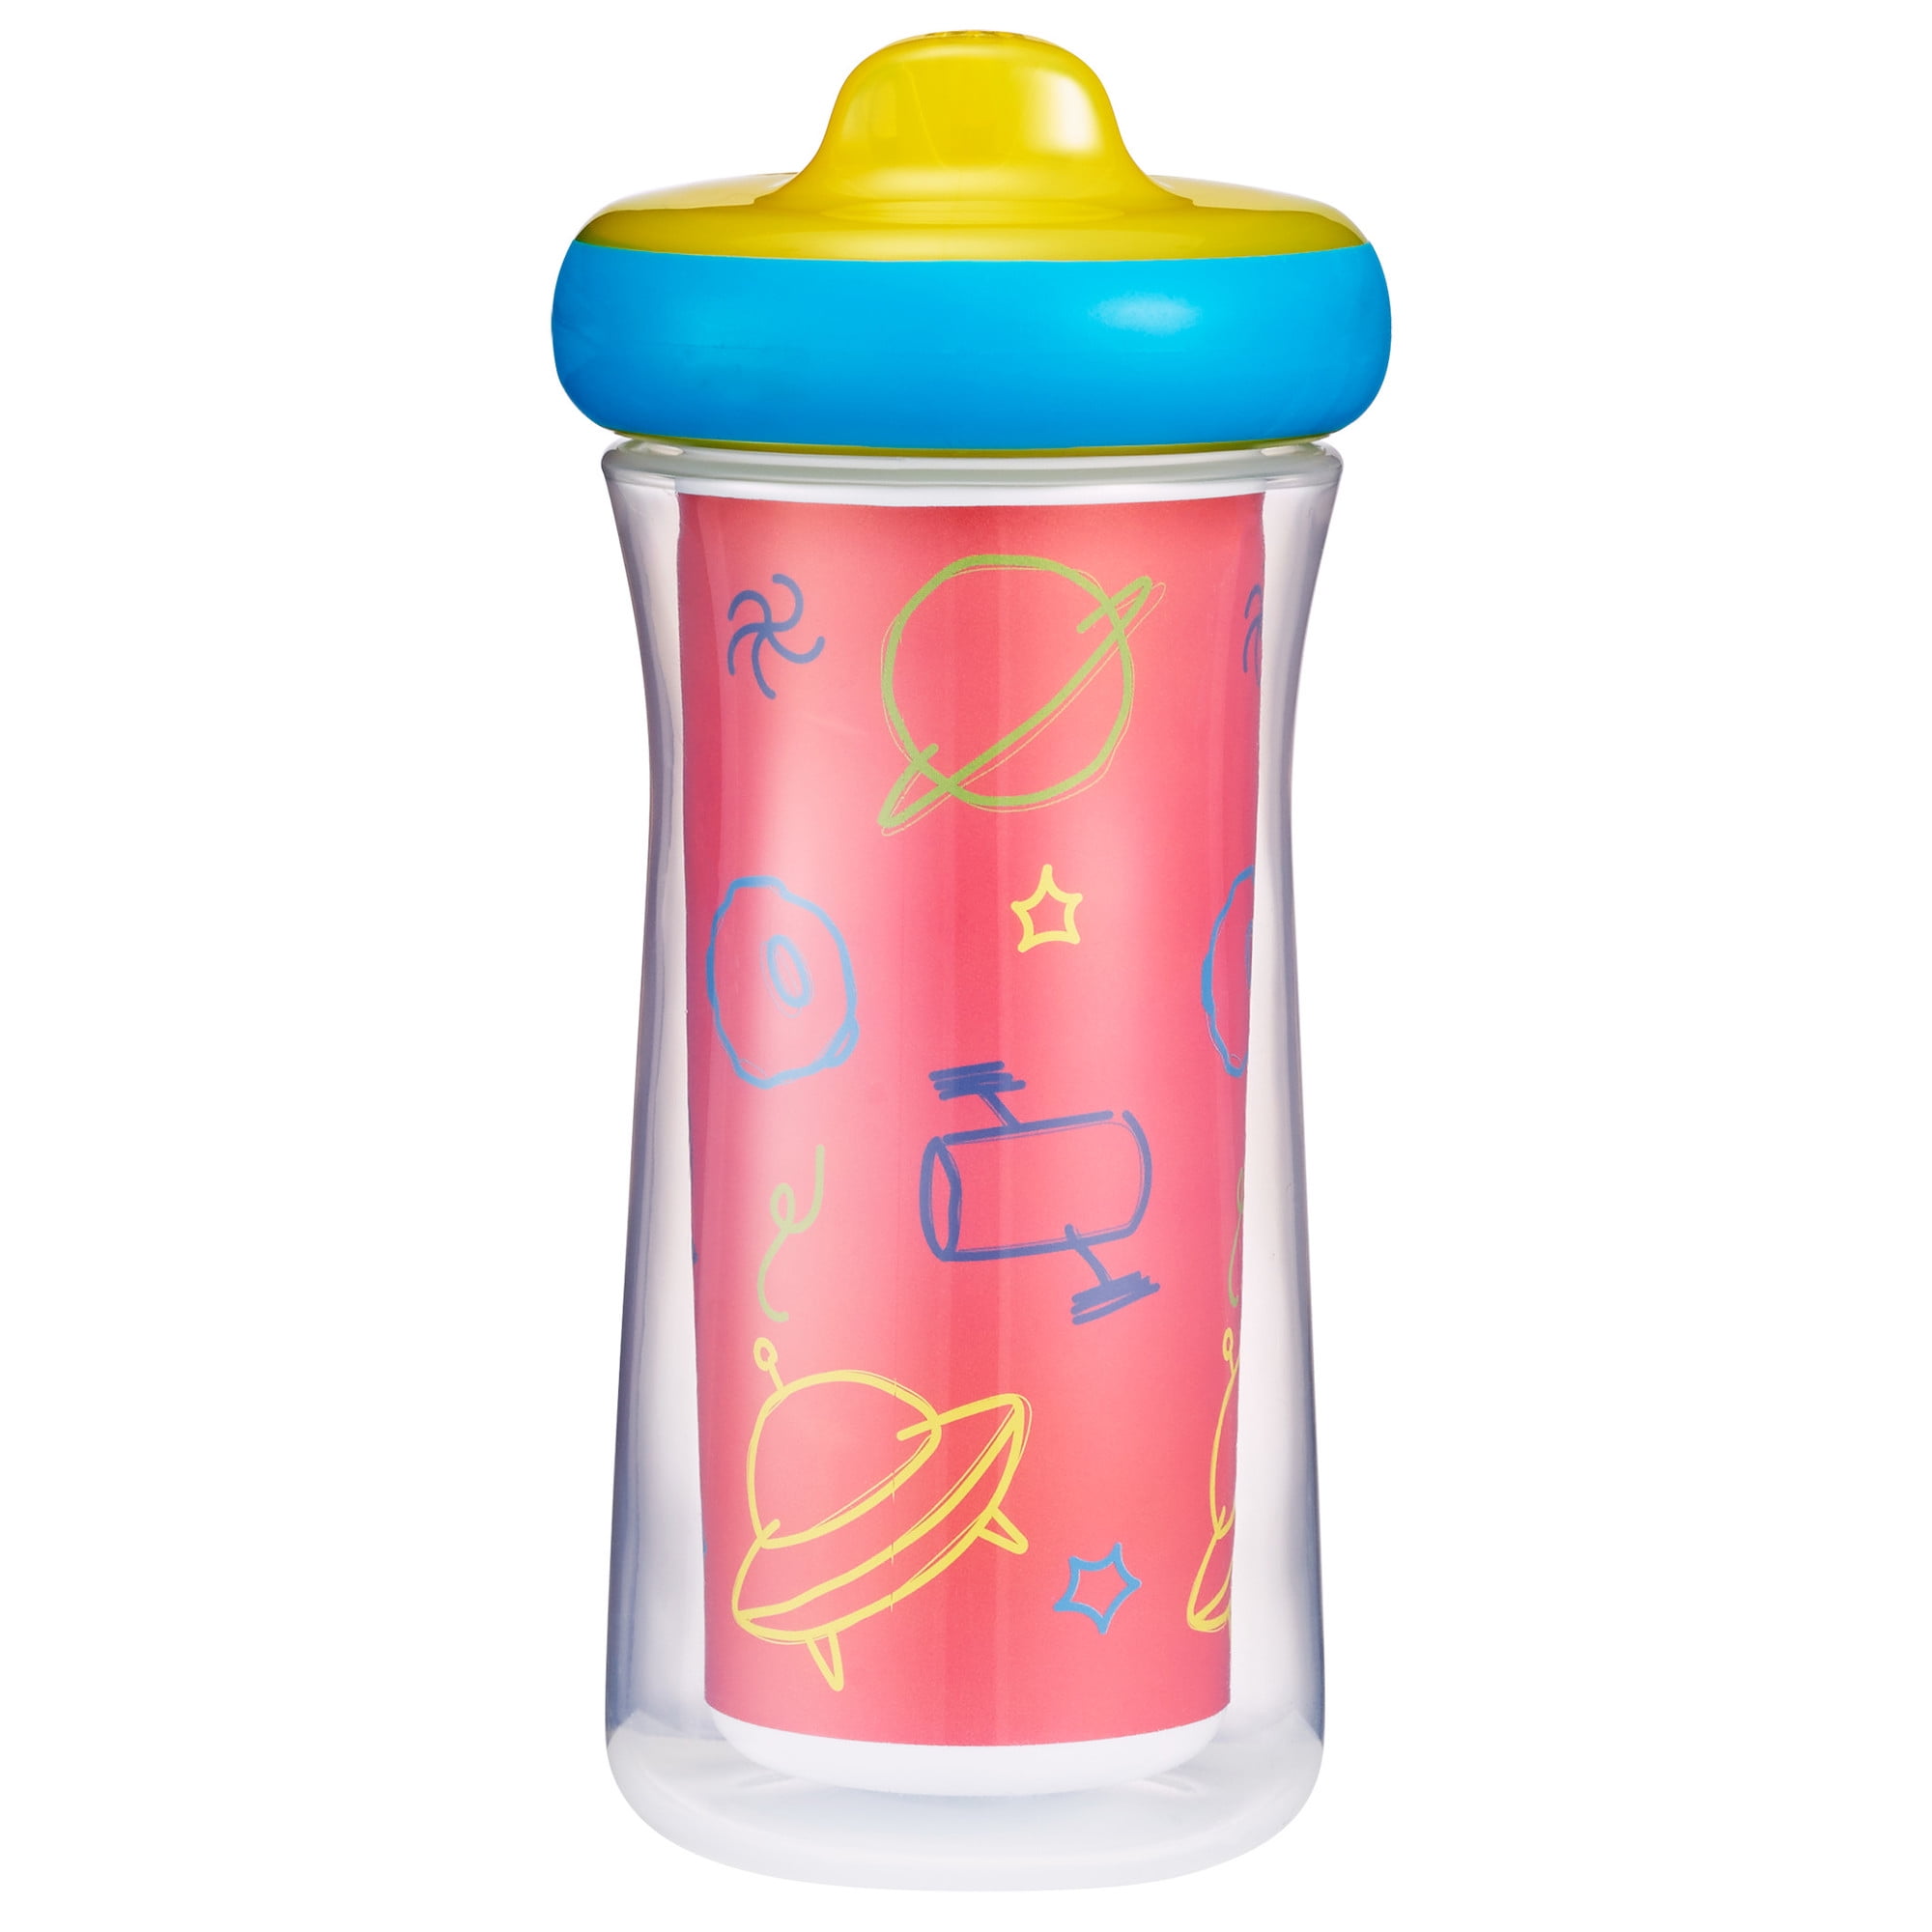 The First Years 4pk Insulated Sippy Cup - Birds